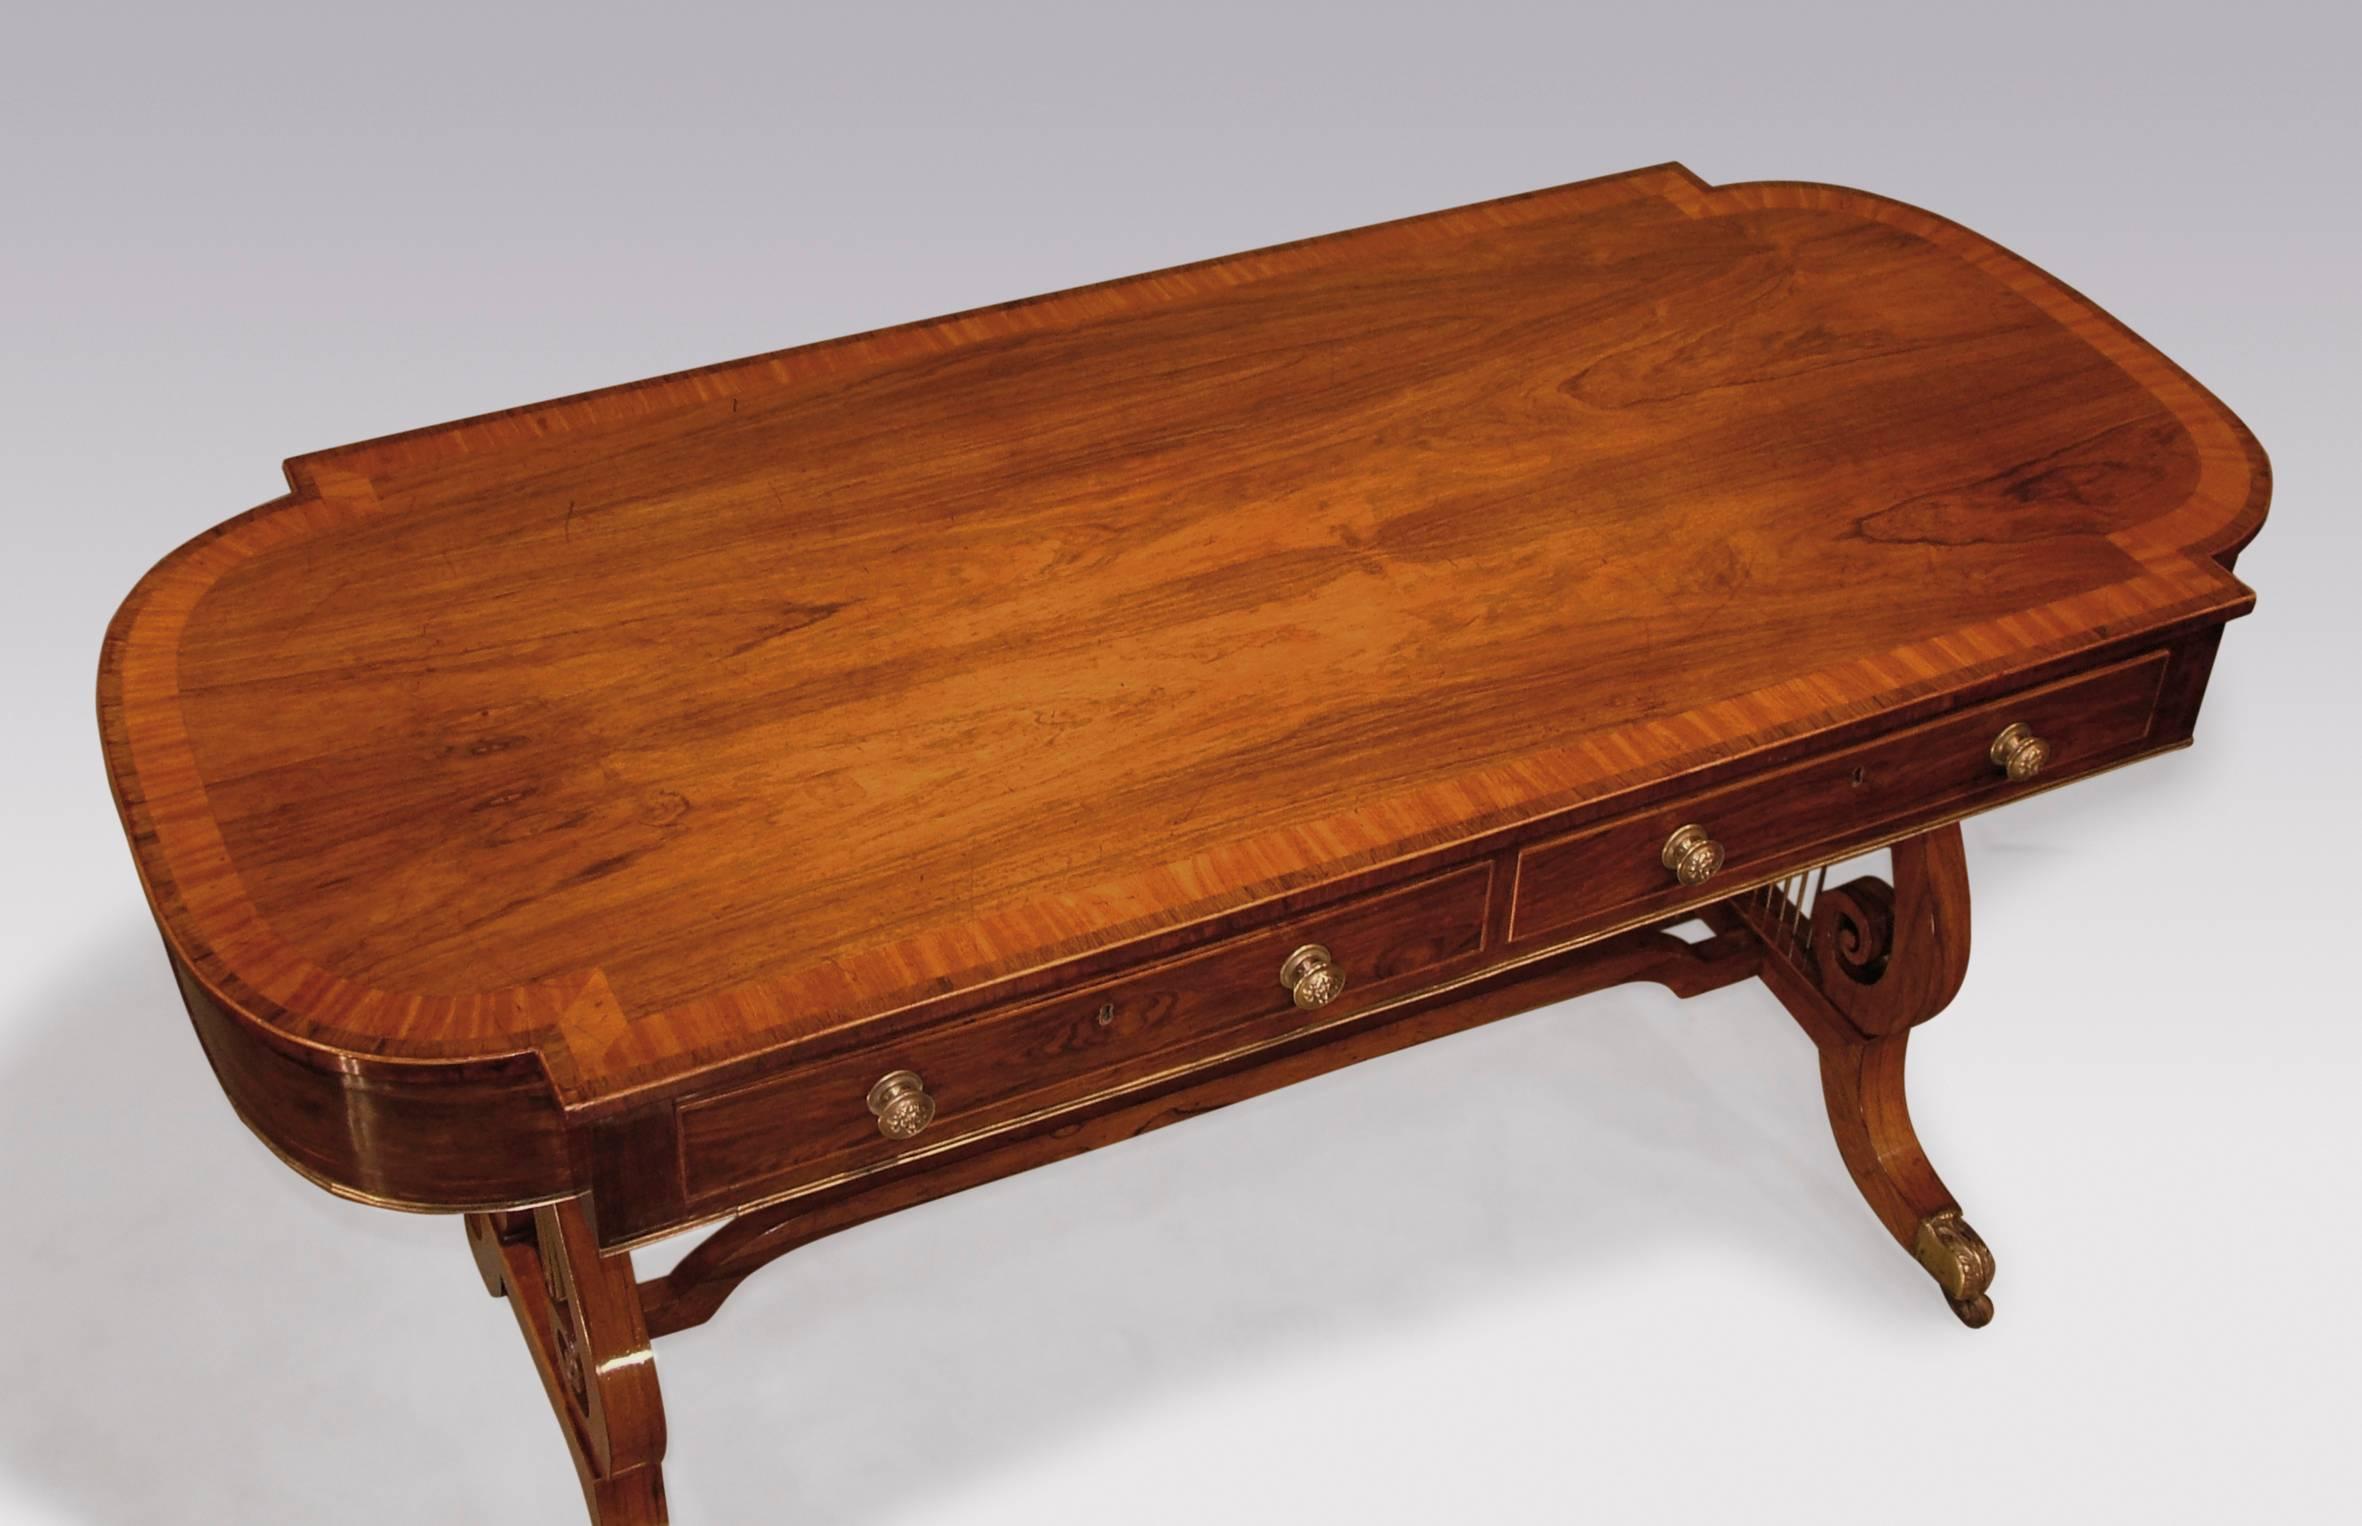 An early 19th century Regency period rosewood writing table, boxwood strung throughout, having lobe ended satinwood crossbanded top, above brass moulded edge frieze. The table with two real and two dummy drawers, raised on lyre end supports joined